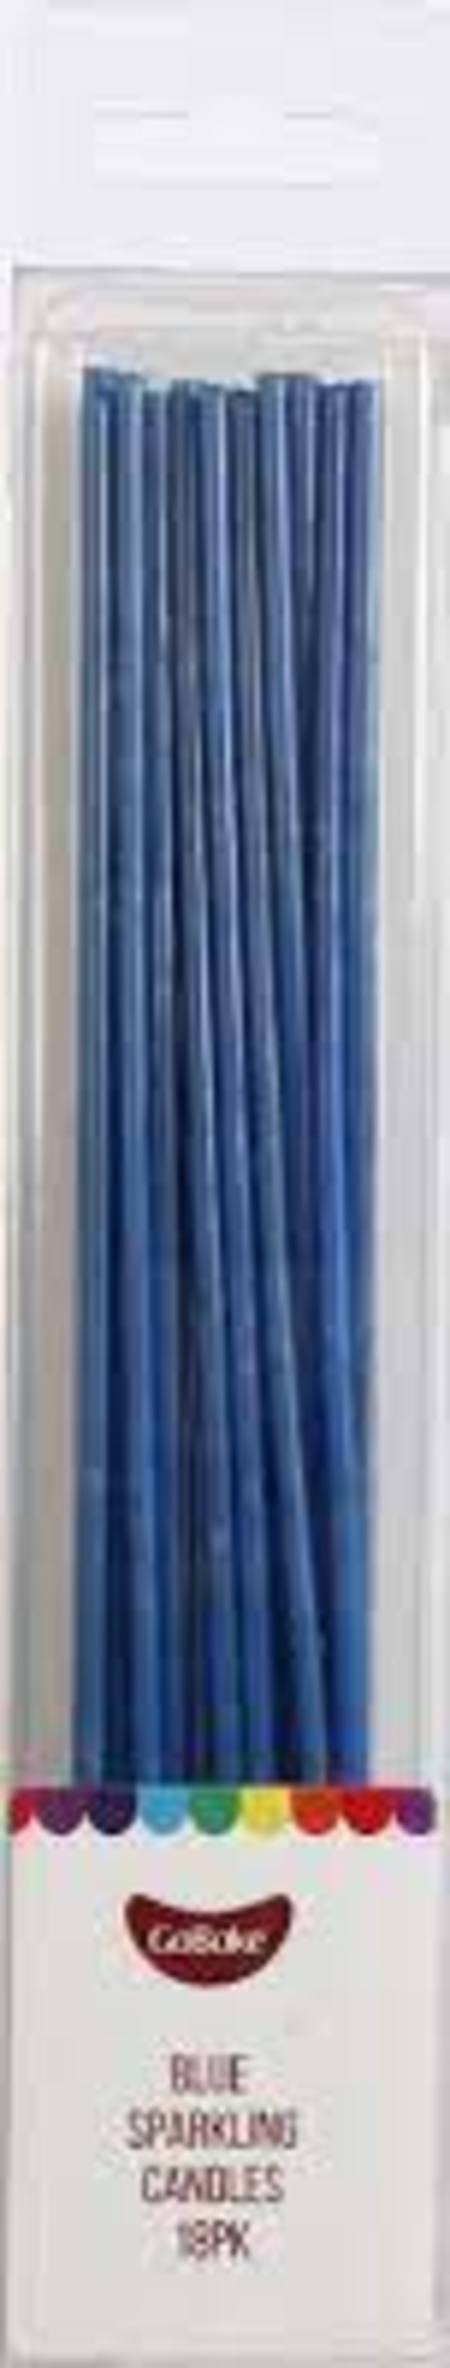 Candles Sparkling - Blue Pkt of 18